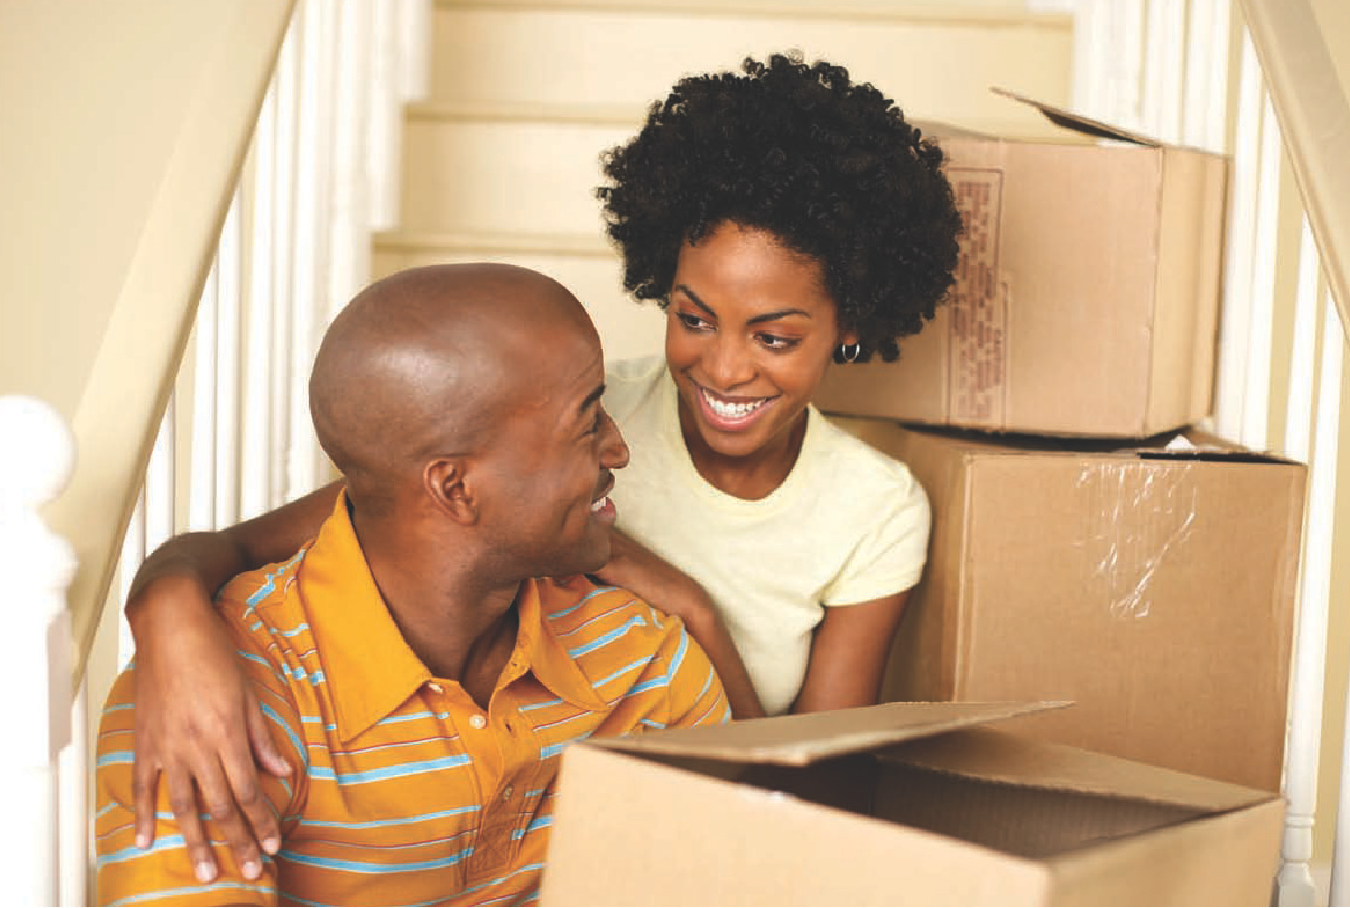 10 Steps: How to Make a Successful Relocation Move